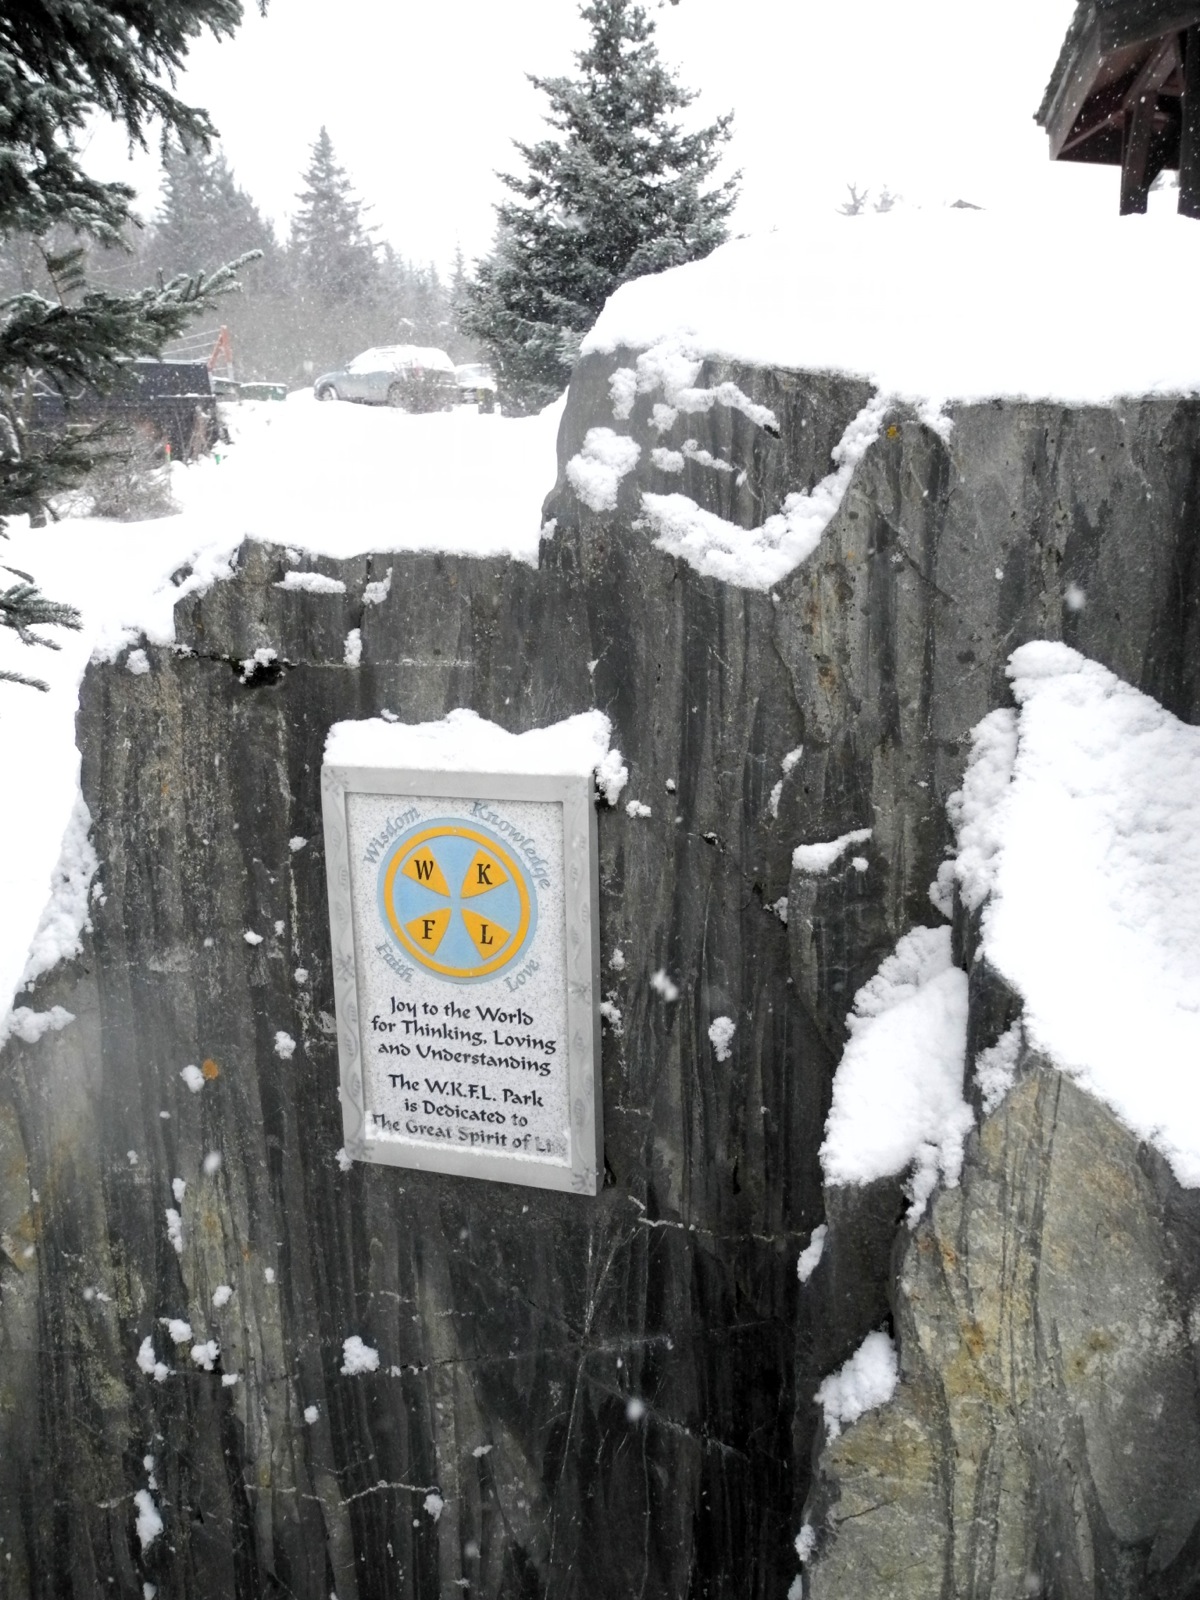 Fresh snow covers the rock at WKFL Park on Valentine's Day. John Nazarian proposed donating a bronze statue of Brother Asaiah Bates to go on this rock. A plaque on the rock explains the meaning of WKFL — "Wisdom, Knowledge, Faith and Love."-Photo by Michael Armstrong, Homer News